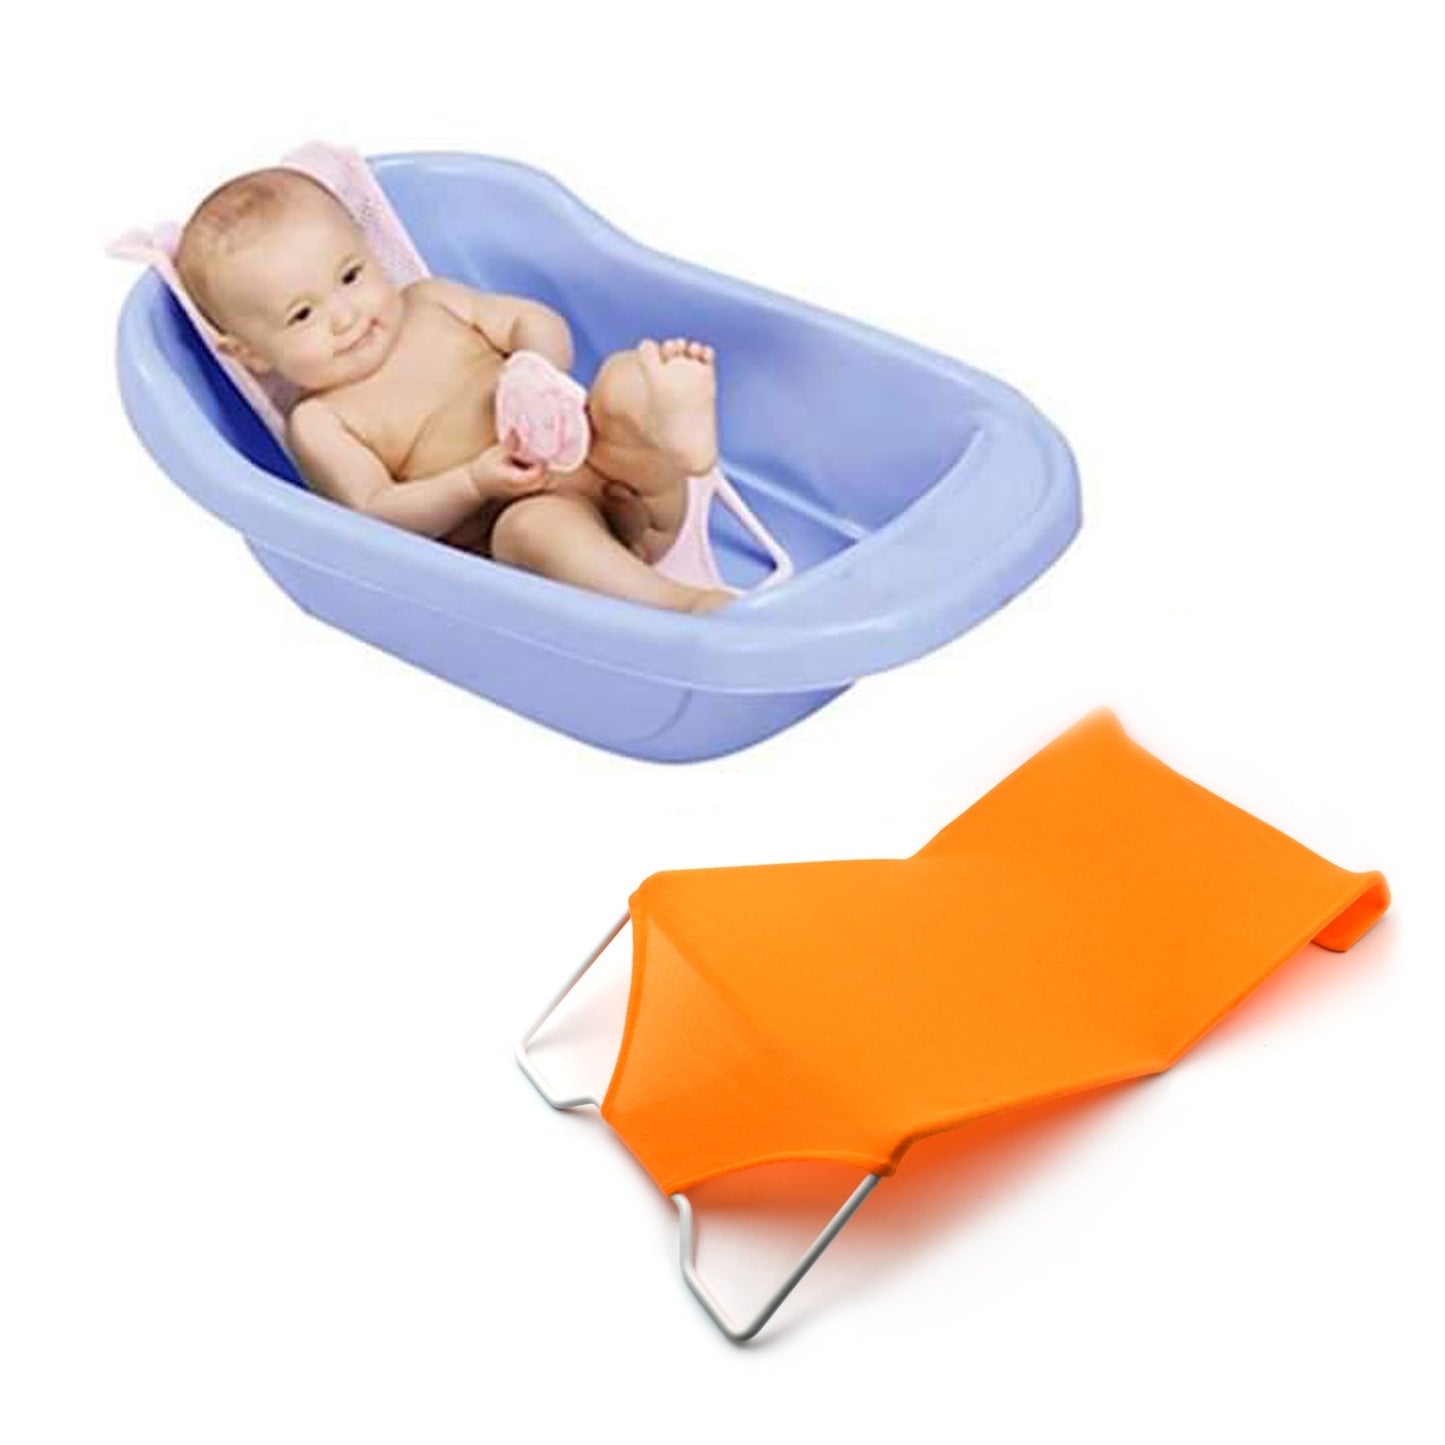 Baby Shower Seat Bed used in all household bathrooms for bathing purposes etc.